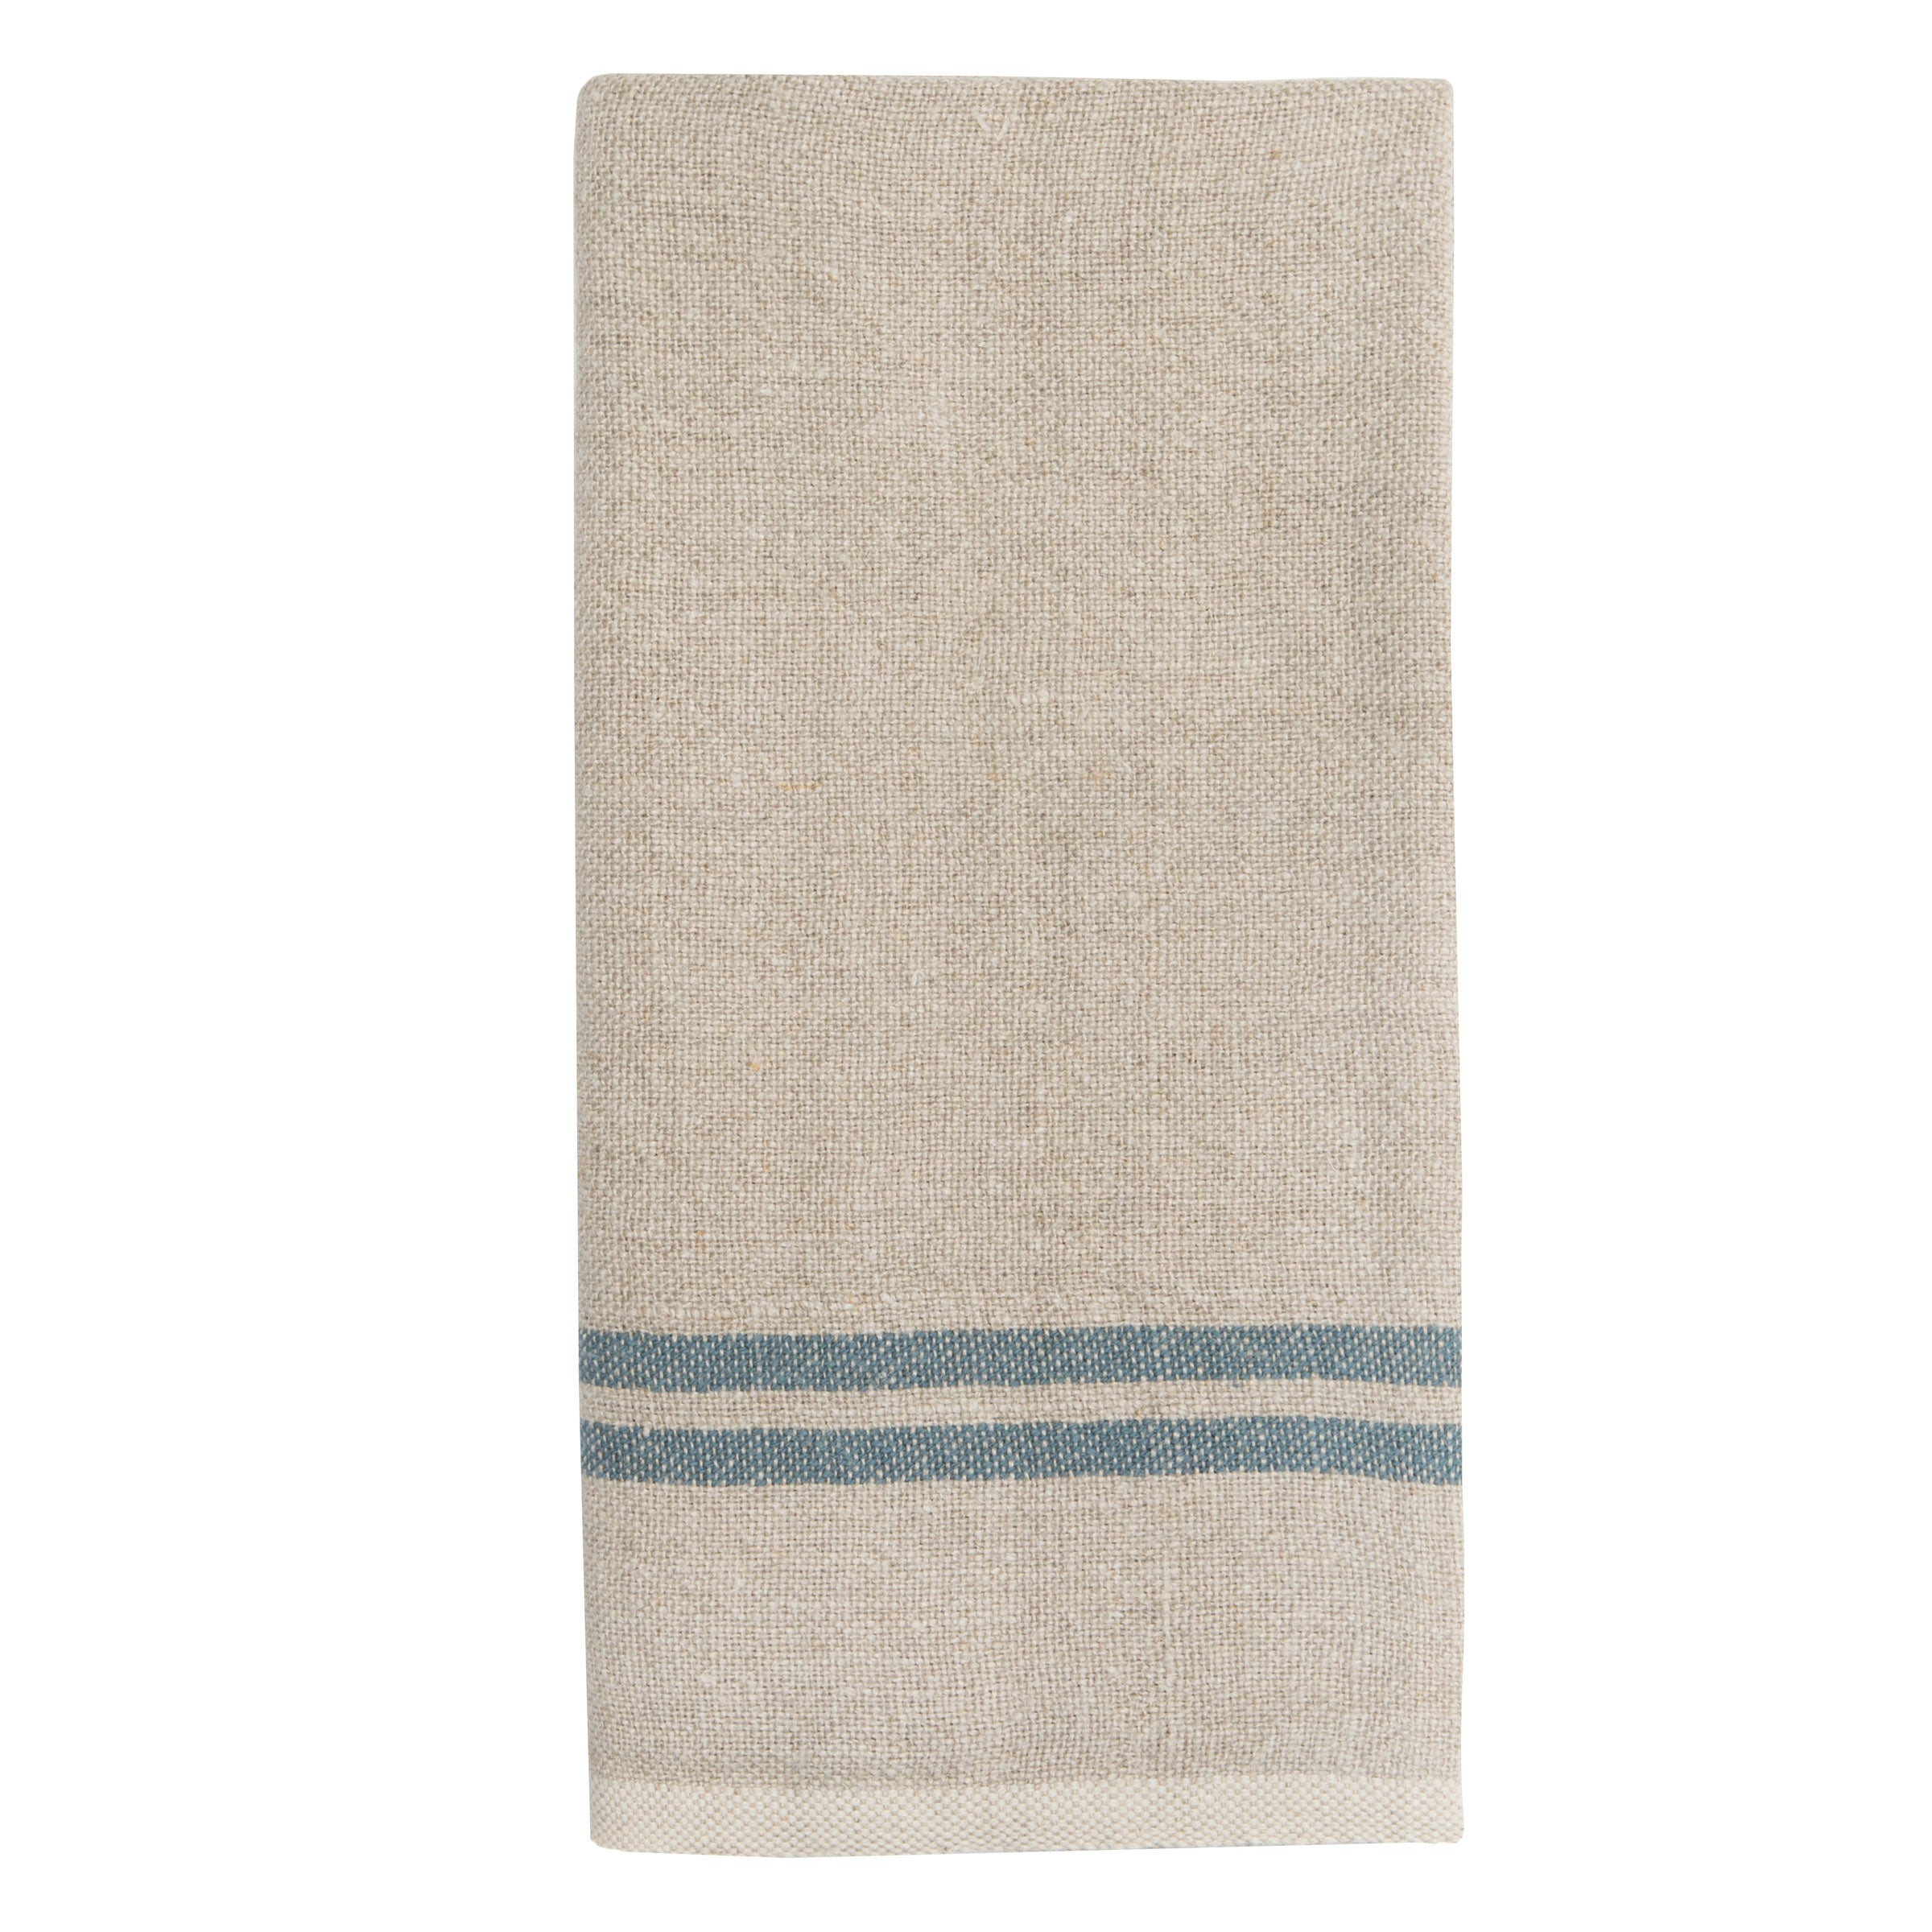 Buy Set of 2 Linen Tea Towels Navy With Natural. Washed Linen